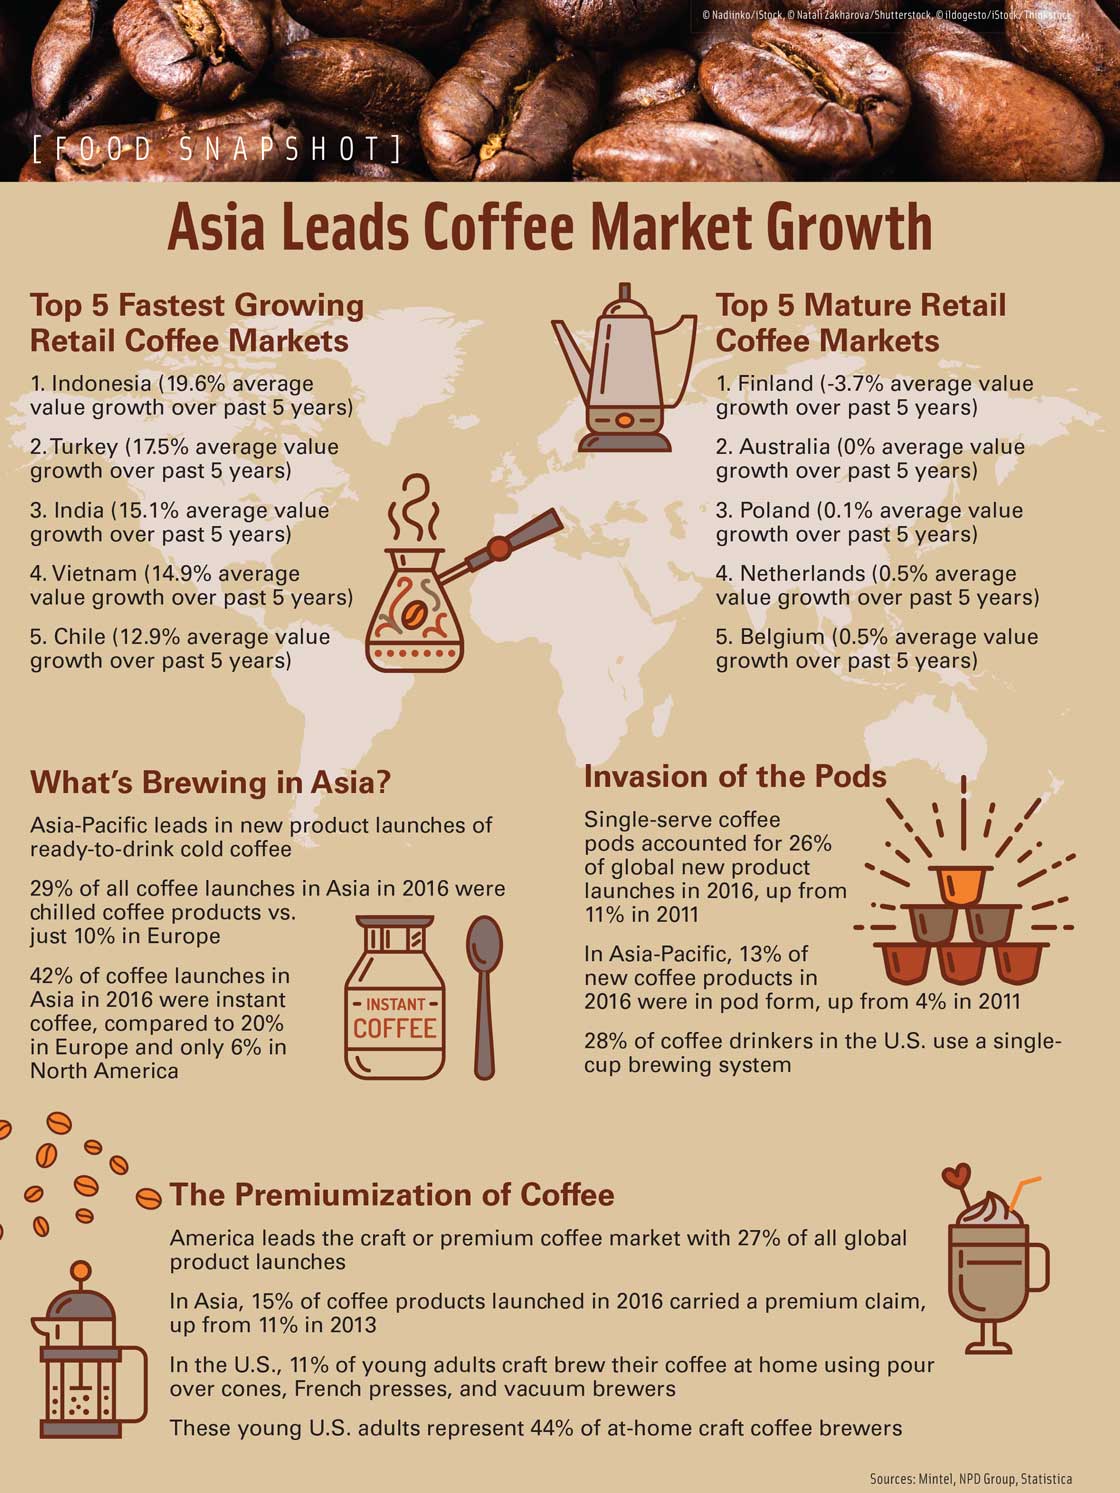 Asia Leads Coffee Market Growth. Sources: Mintel, NPD Group, Statistica